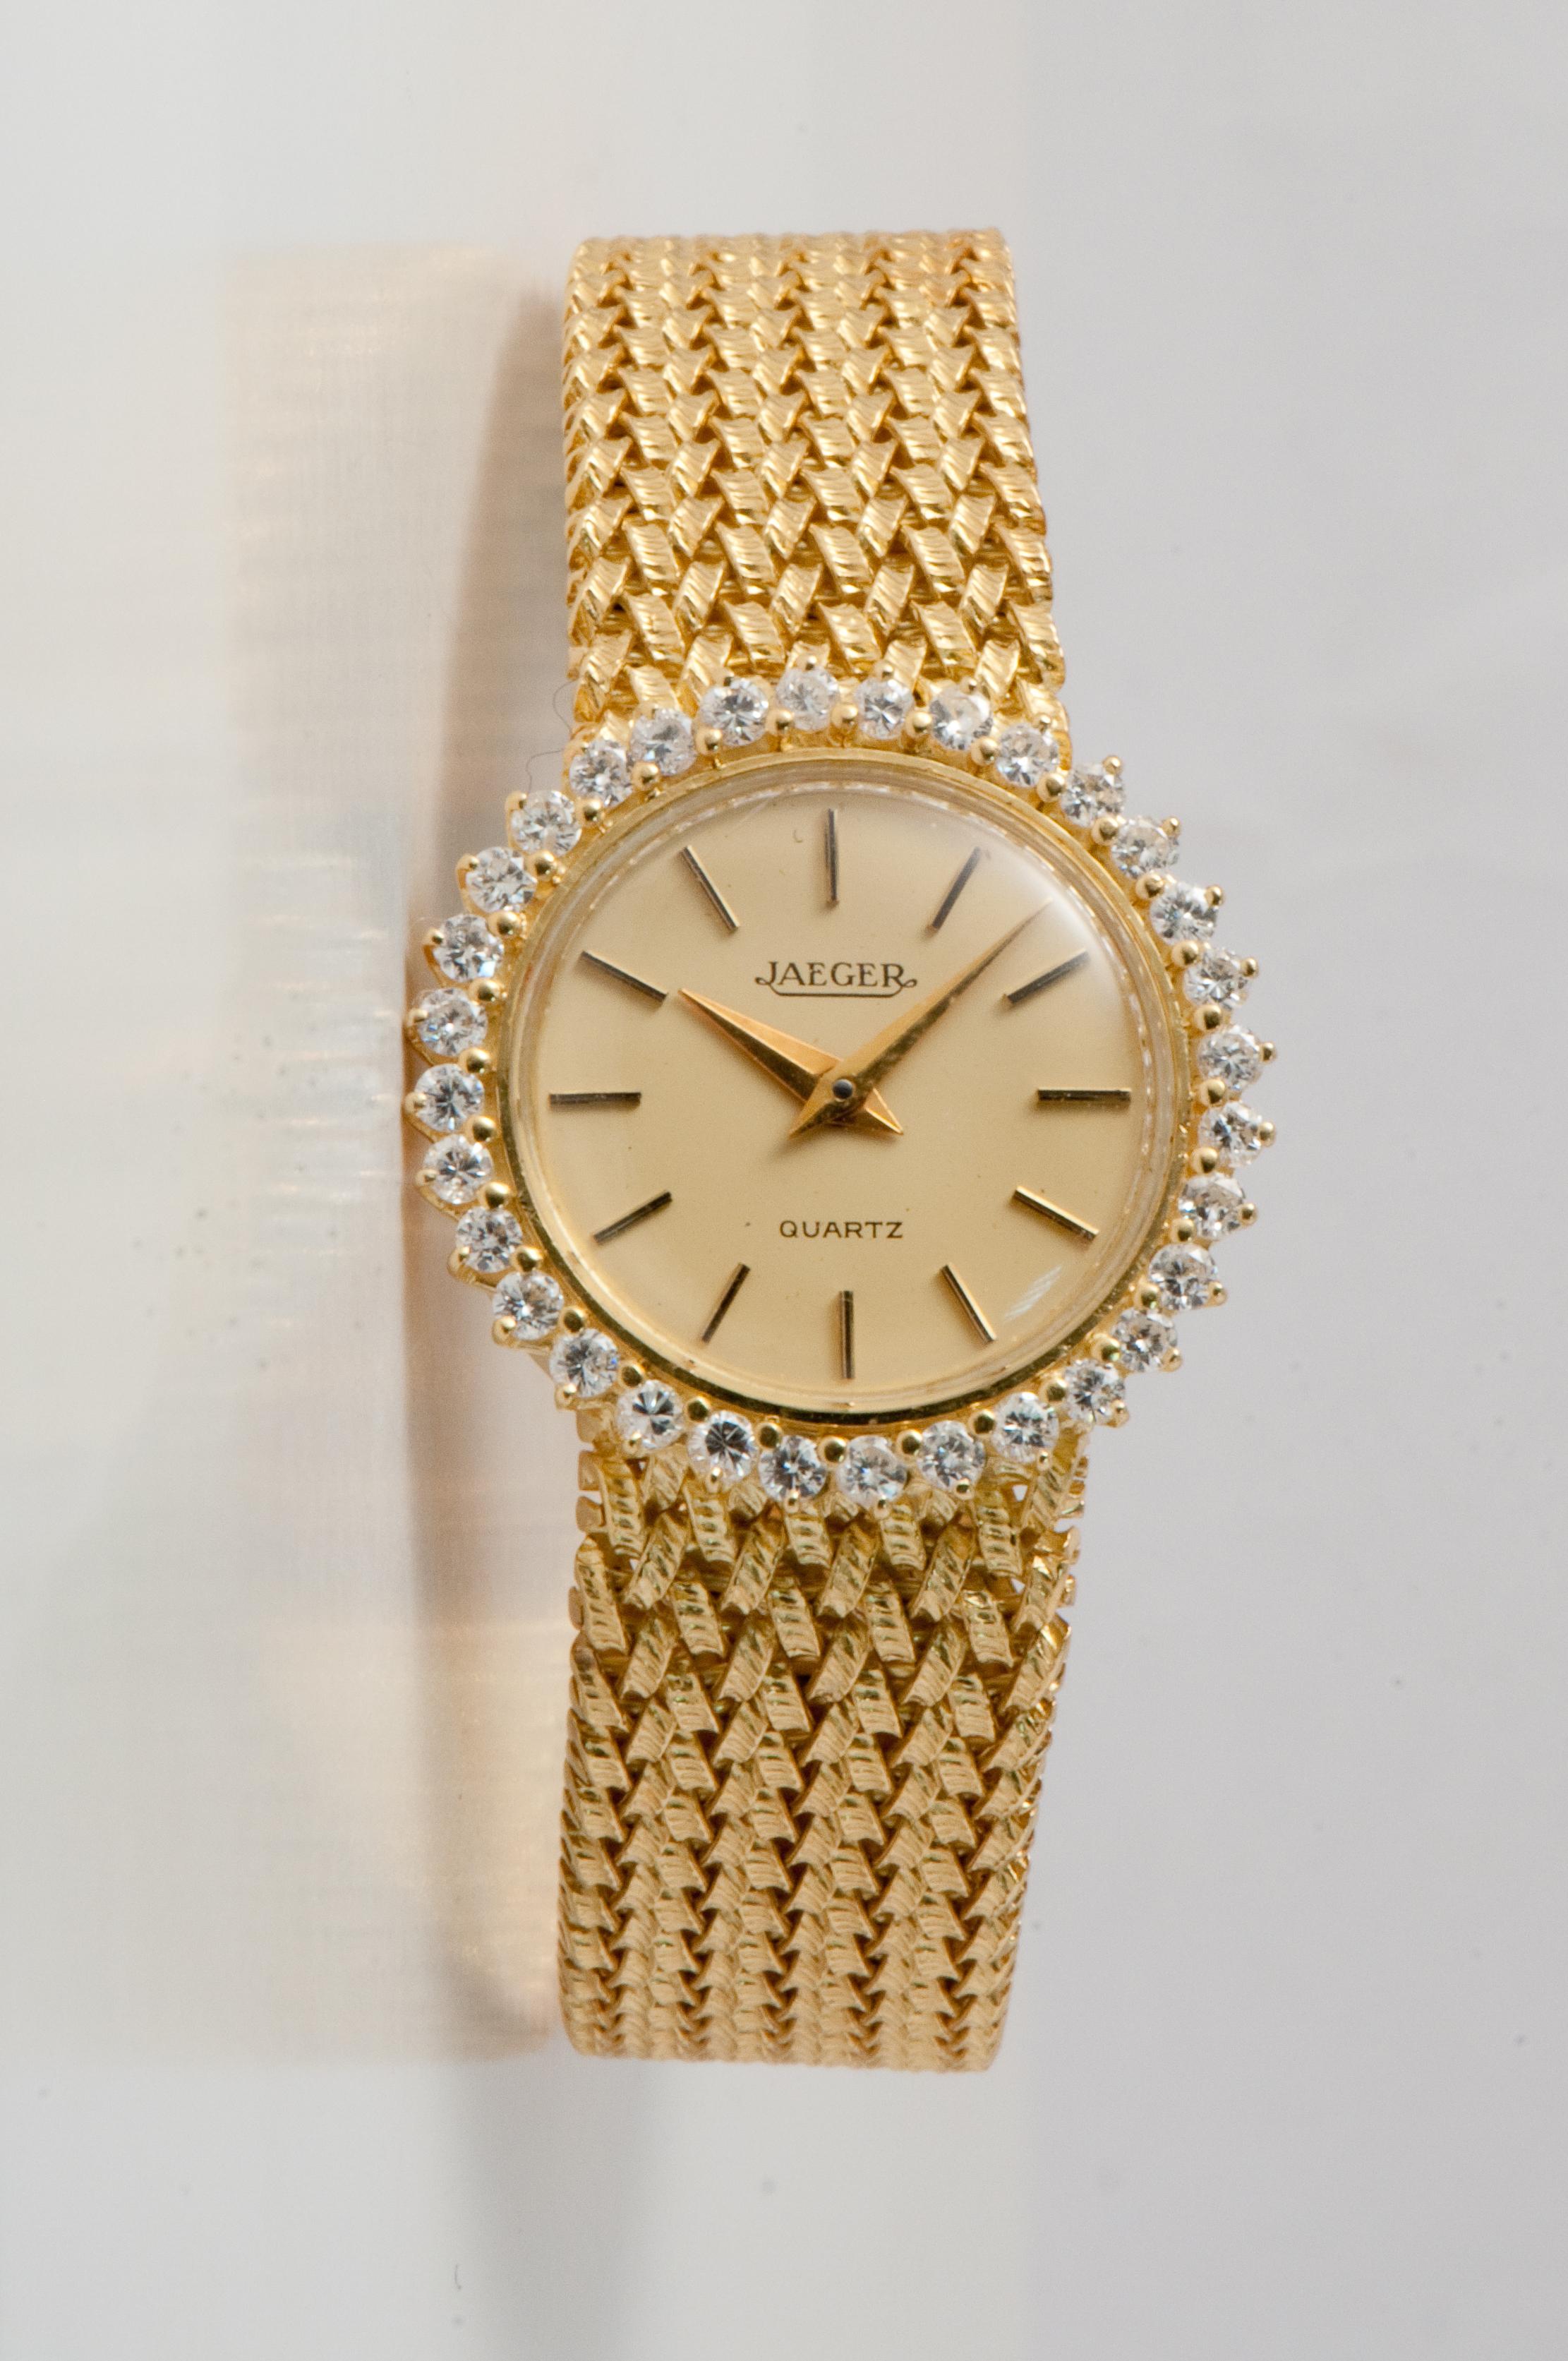 Gold Watch with 32 diamonds (0.03 ct) total 0.96 ct
Gold 42.93 g
Diameter 25 mm